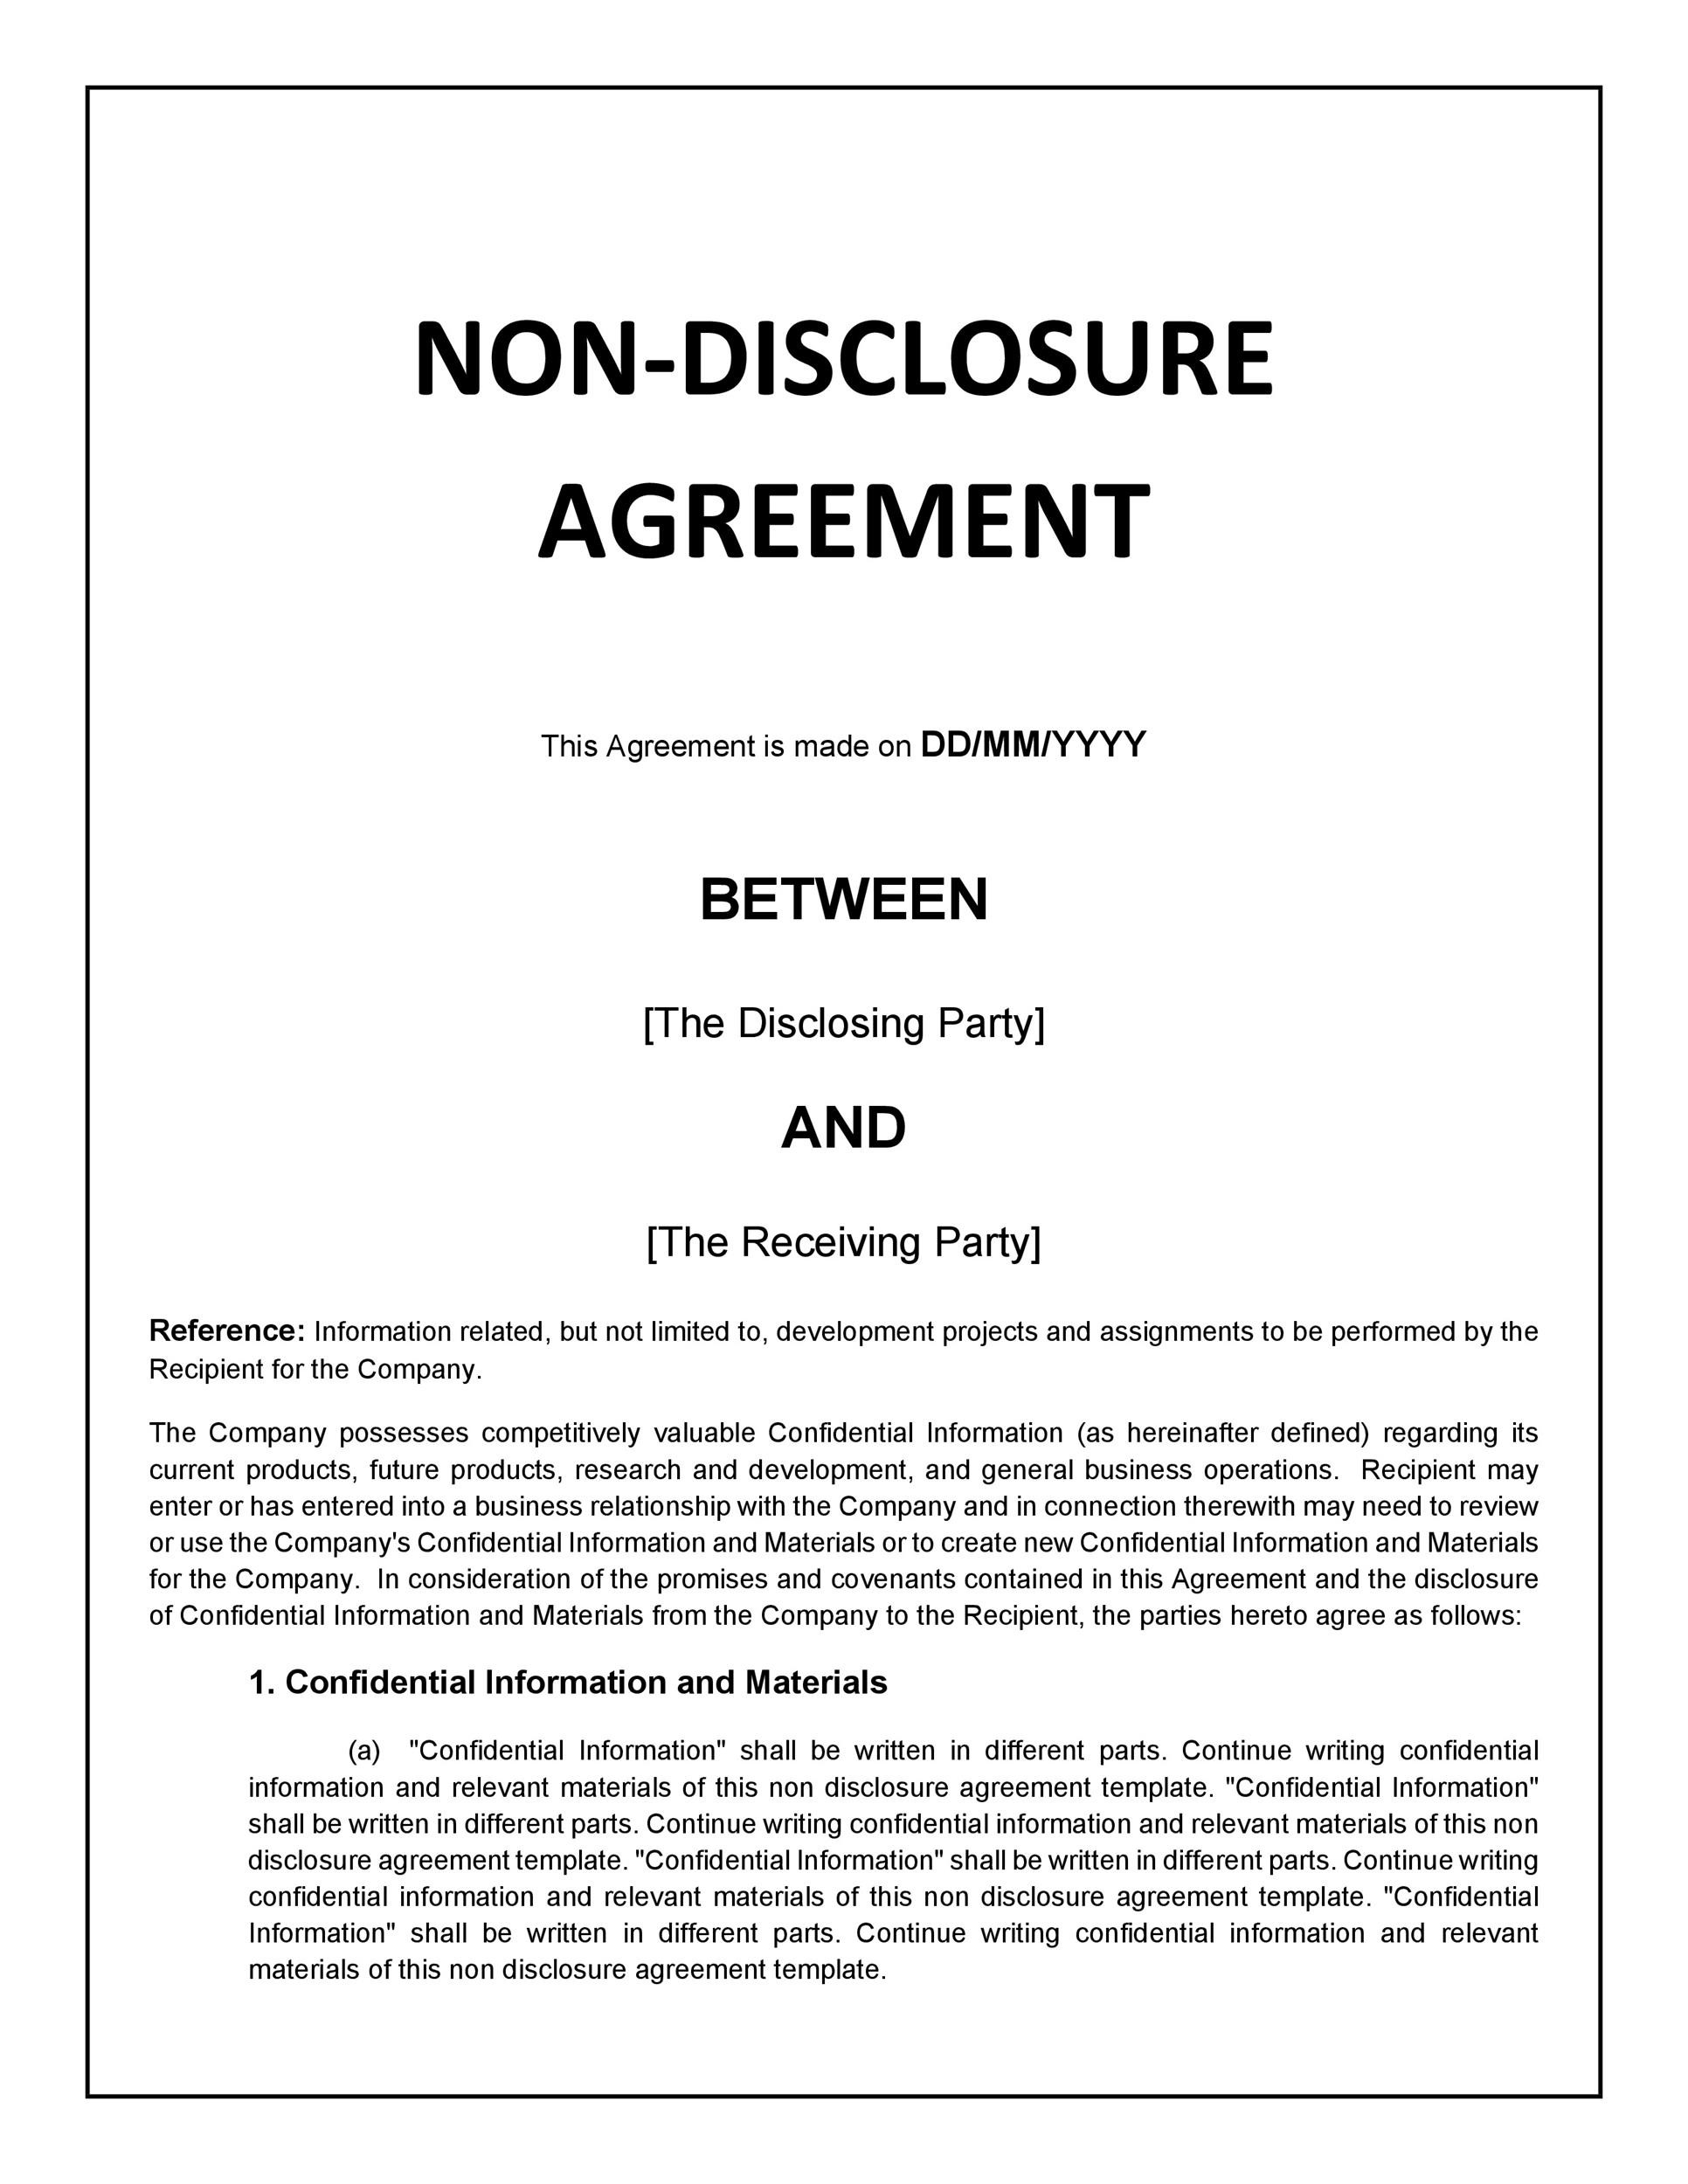 40 Non Disclosure Agreement Templates Samples Forms TemplateLab